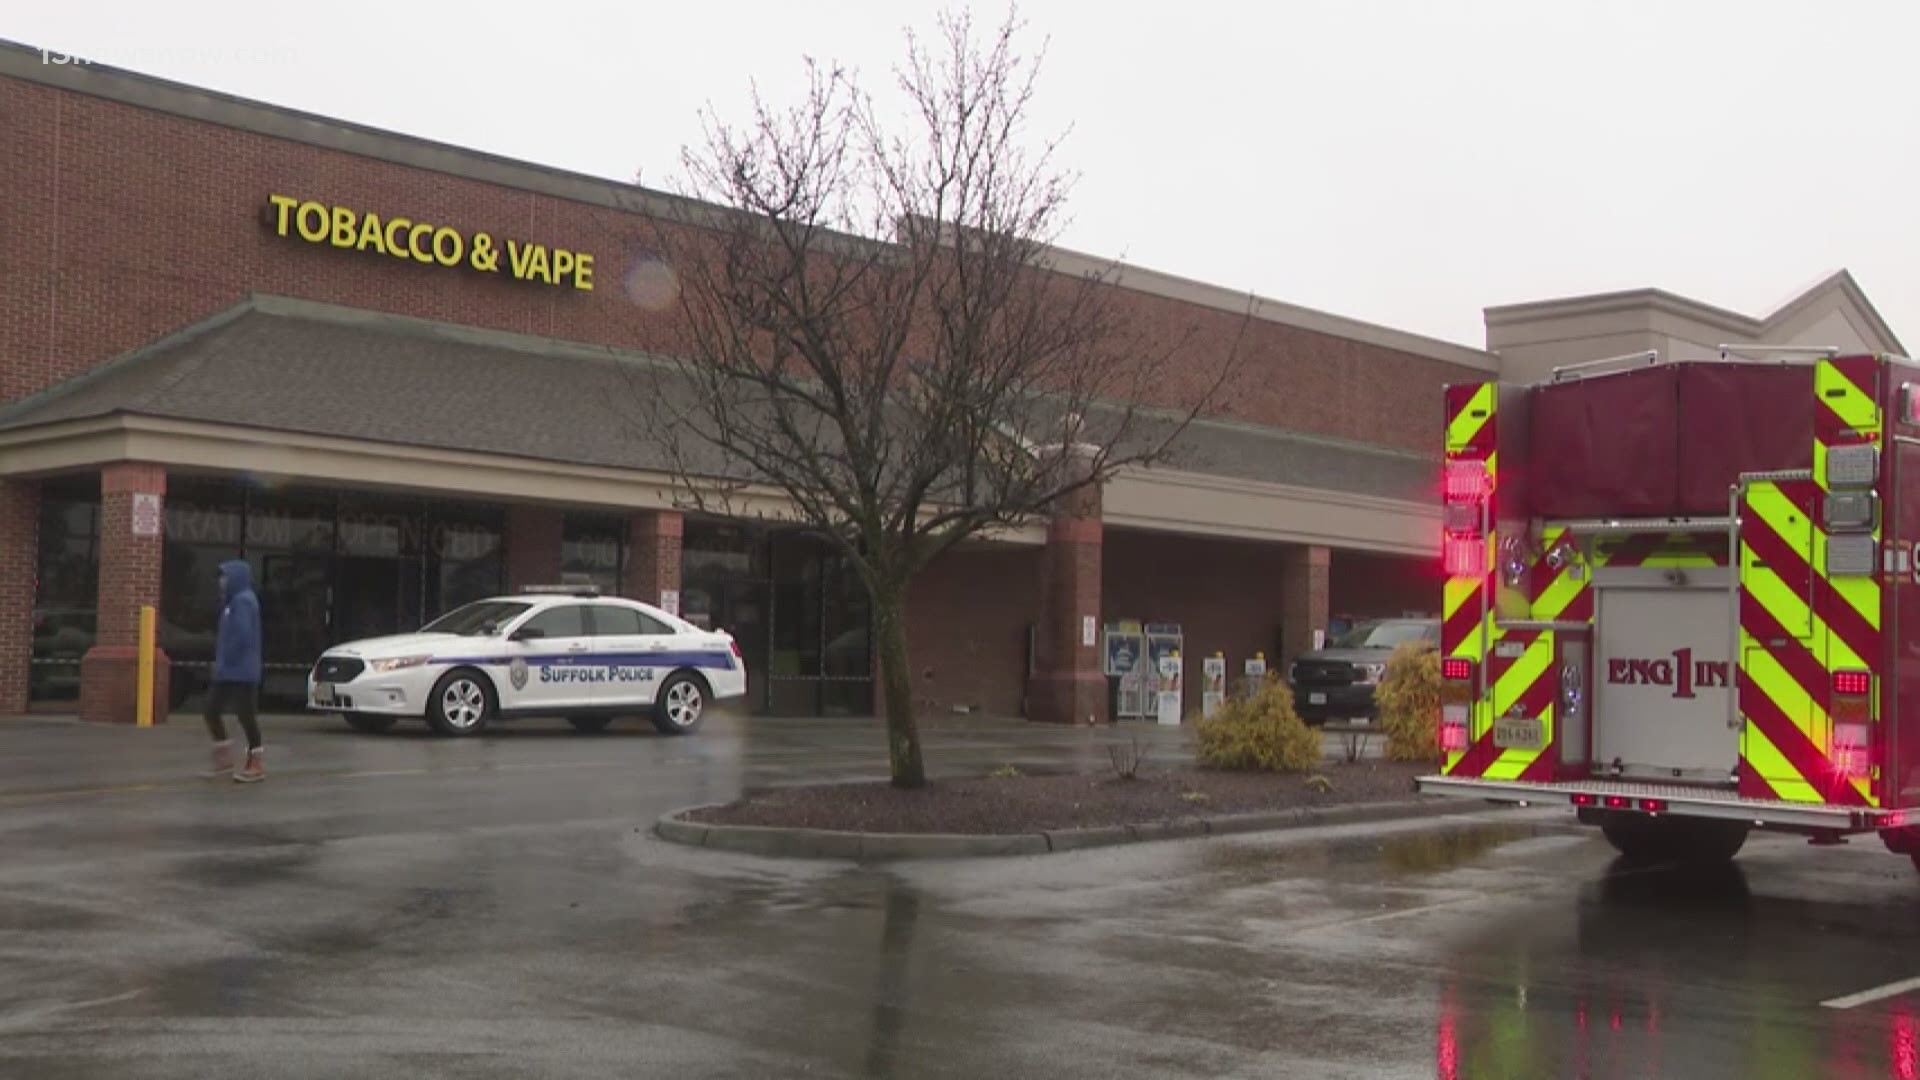 Because of a car crash, shops at the Oak Ridge Shopping Center in Suffolk could stay closed for some time. 13News Now Anne Sparaco has more.